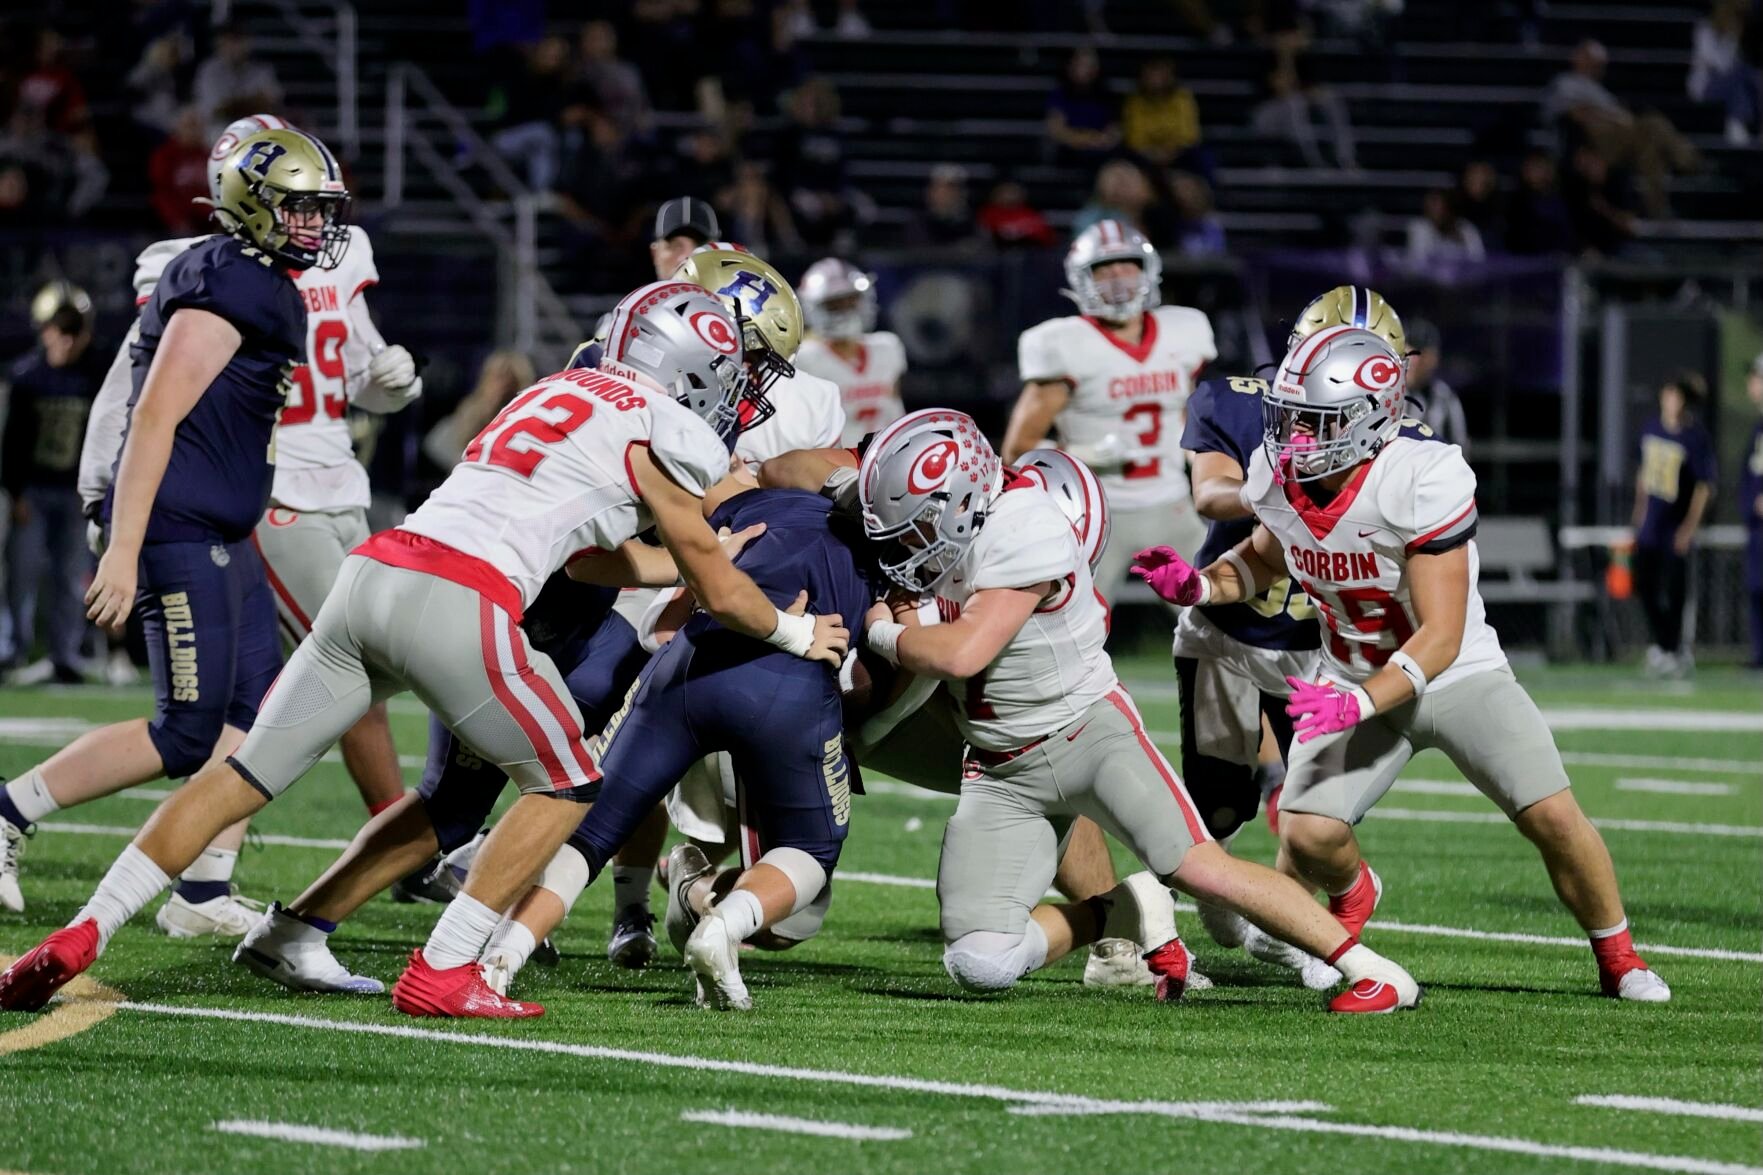 Corbin Redhounds Finish Regular Season Undefeated and Prepare for Playoffs